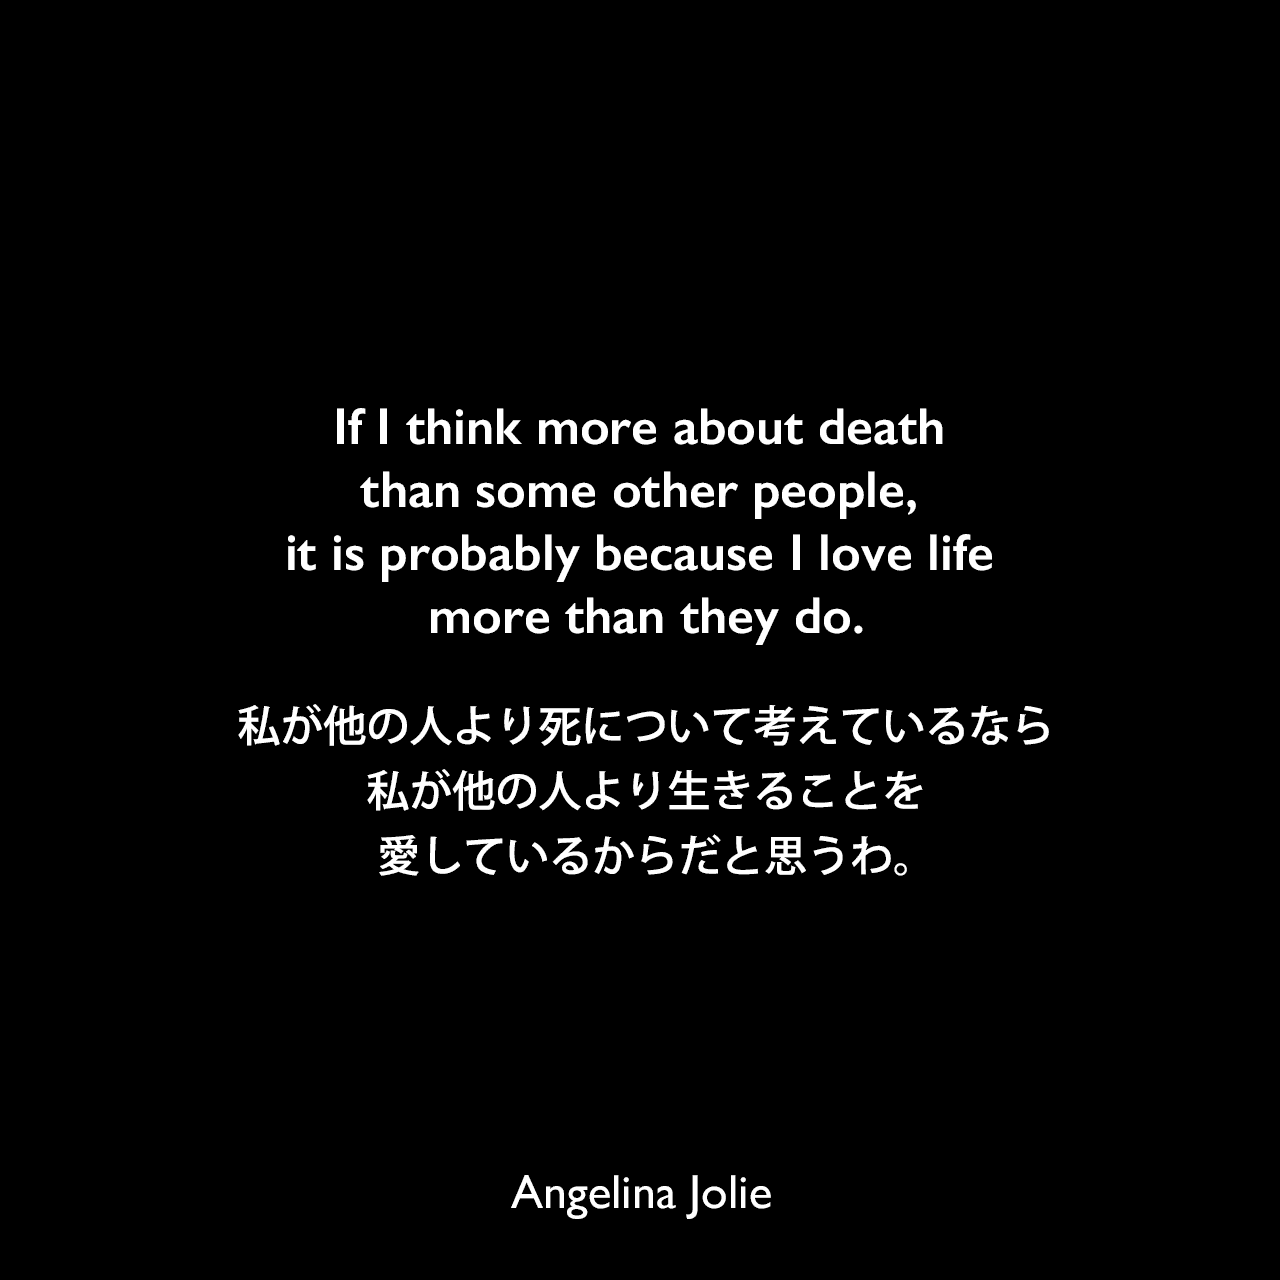 If I think more about death than some other people, it is probably because I love life more than they do.私が他の人より死について考えているなら、私が他の人より生きることを愛しているからだと思うわ。Angelina Jolie